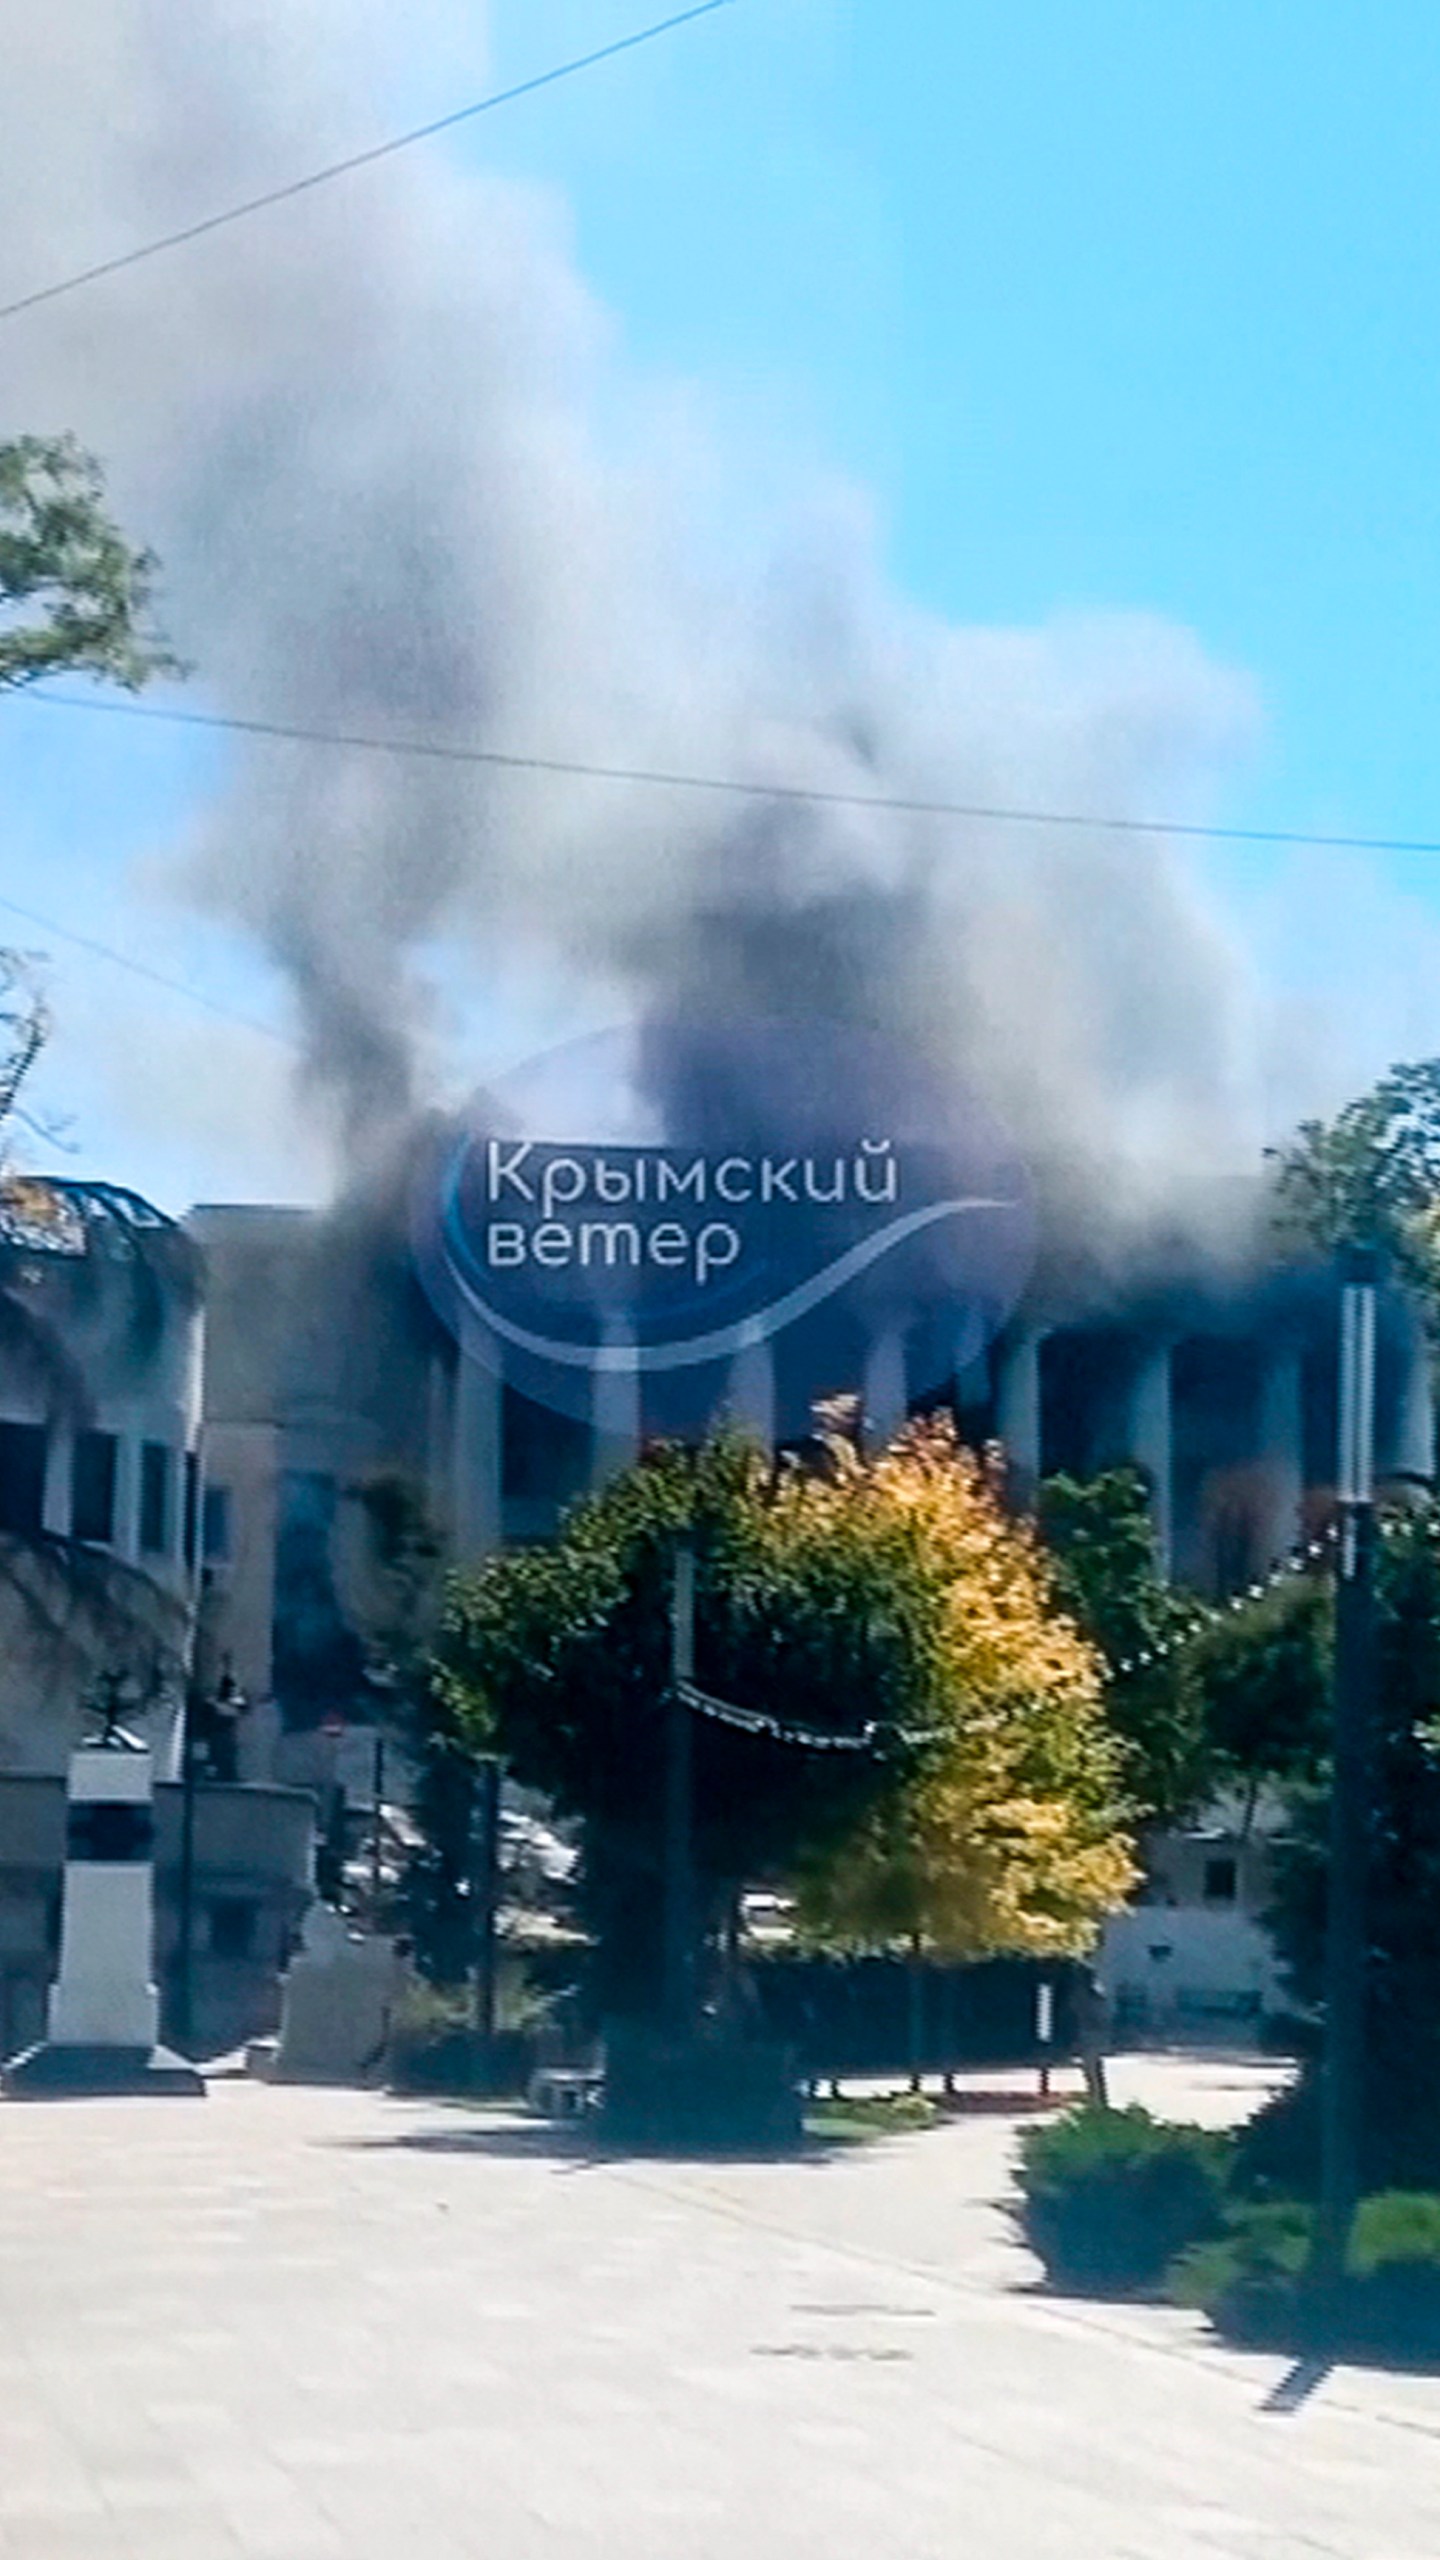 FILE - In this photo taken taken from video on Friday, Sept. 22, 2023, smoke rises over the Headquarters of Russia's Black Sea Fleet in Sevastopol, Crimea. Successful Ukrainian drone and missile strikes have provided a major morale boost for Kyiv at a time when its undermanned and under-gunned forces are facing Russian attacks along the more than 1,000-kilometer front line. Challenging Russia’s naval superiority also has helped create more favorable conditions for Ukrainian grain exports and other shipments from the country’s Black Sea ports. (AP Photo/File)